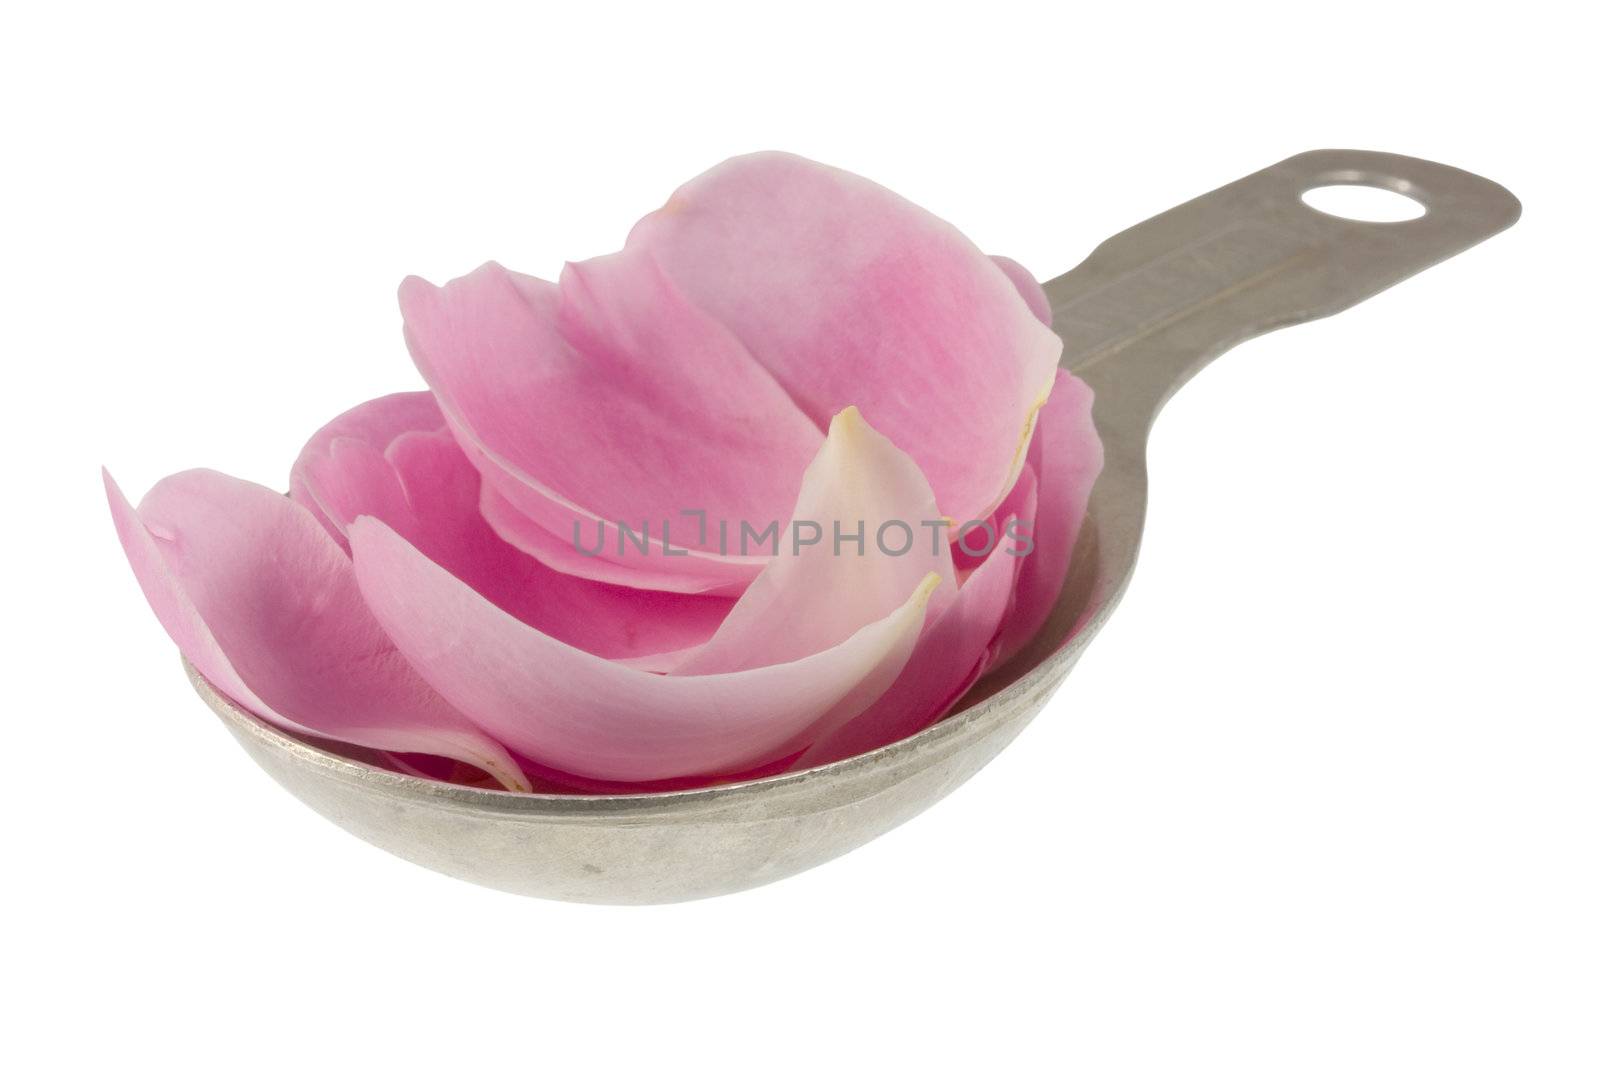 pink rose petals on measuring tablespoon by PixelsAway